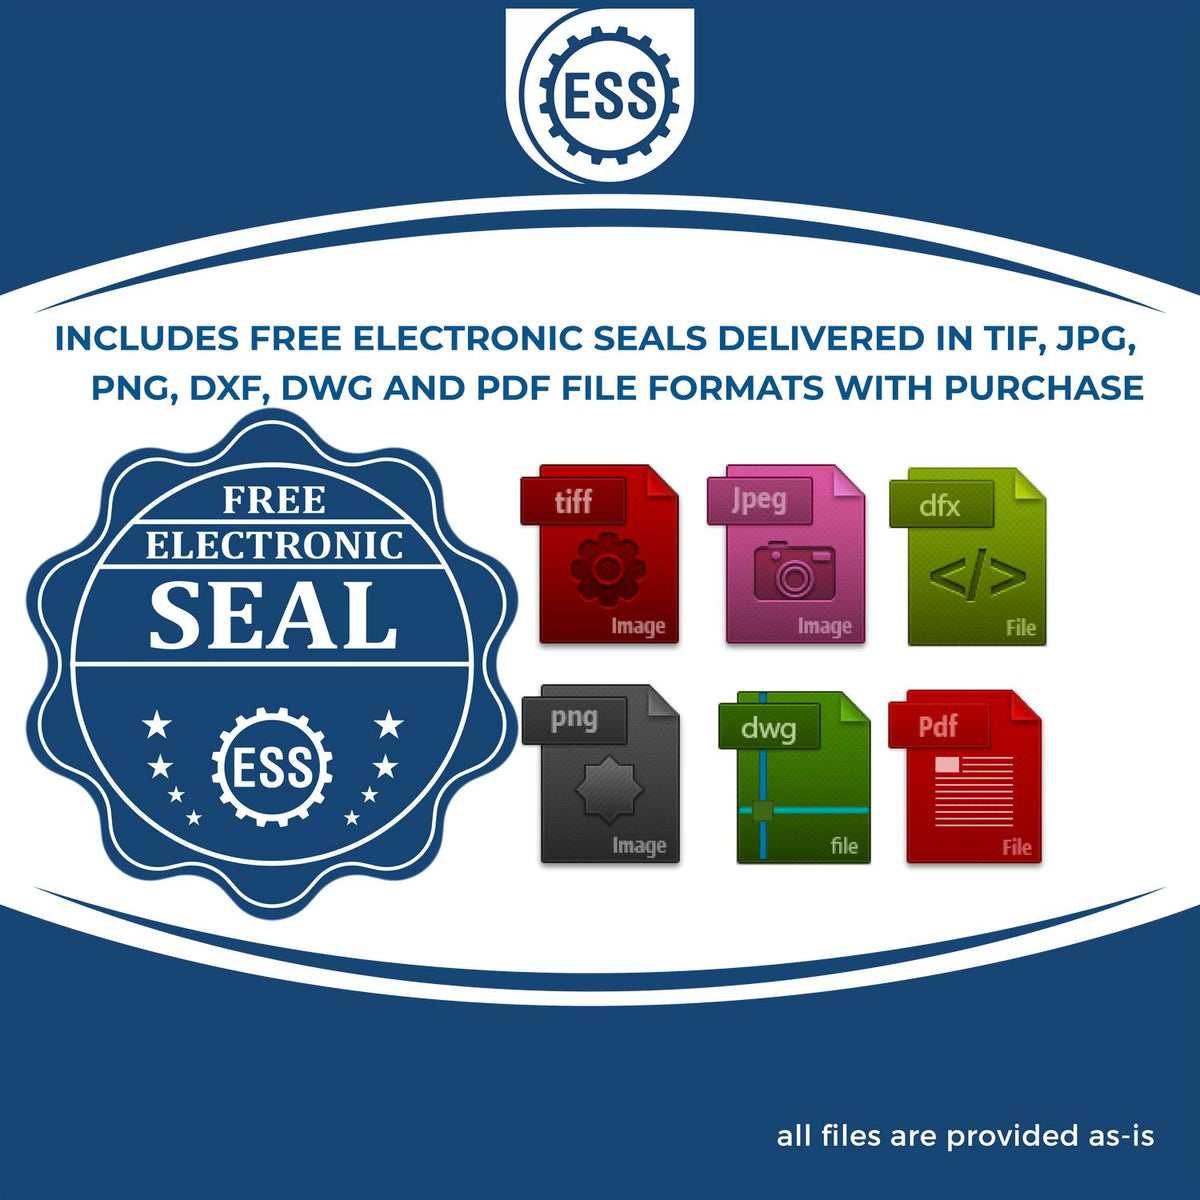 An infographic for the free electronic seal for the Self-Inking State Seal New Jersey Notary Stamp illustrating the different file type icons such as DXF, DWG, TIF, JPG and PNG.